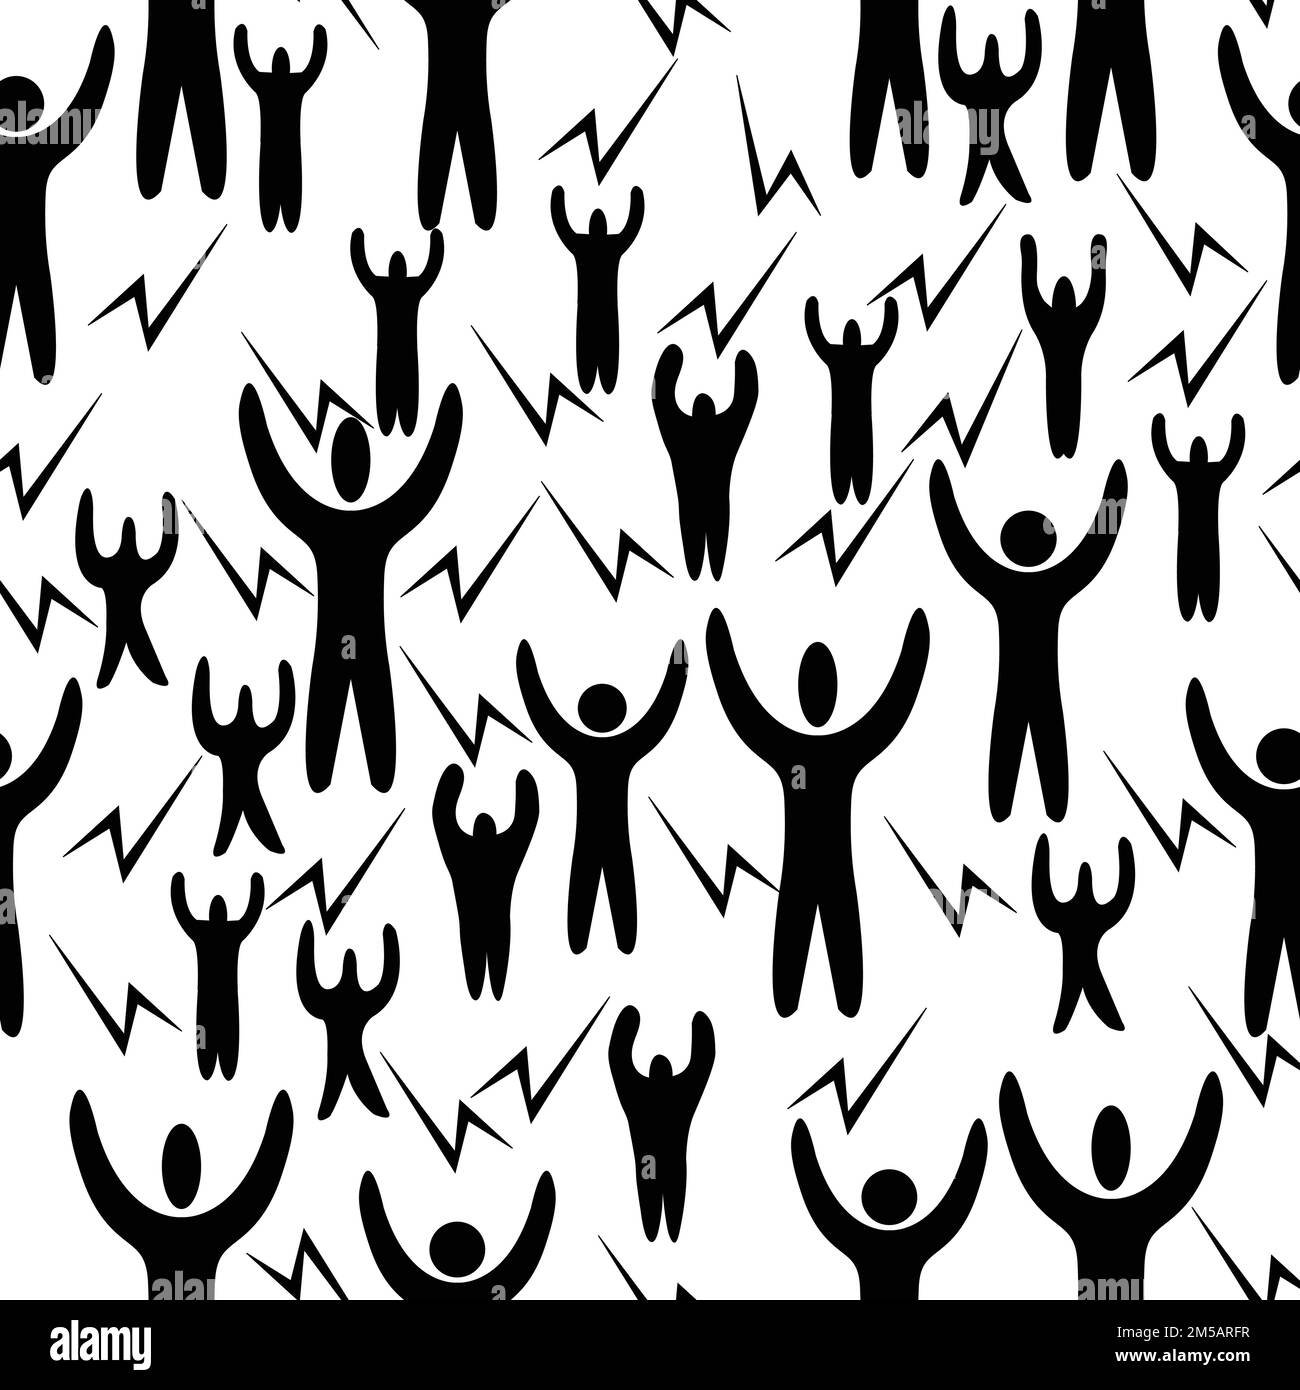 black people icons with raised hands seamless pattern; vector illustration Stock Vector